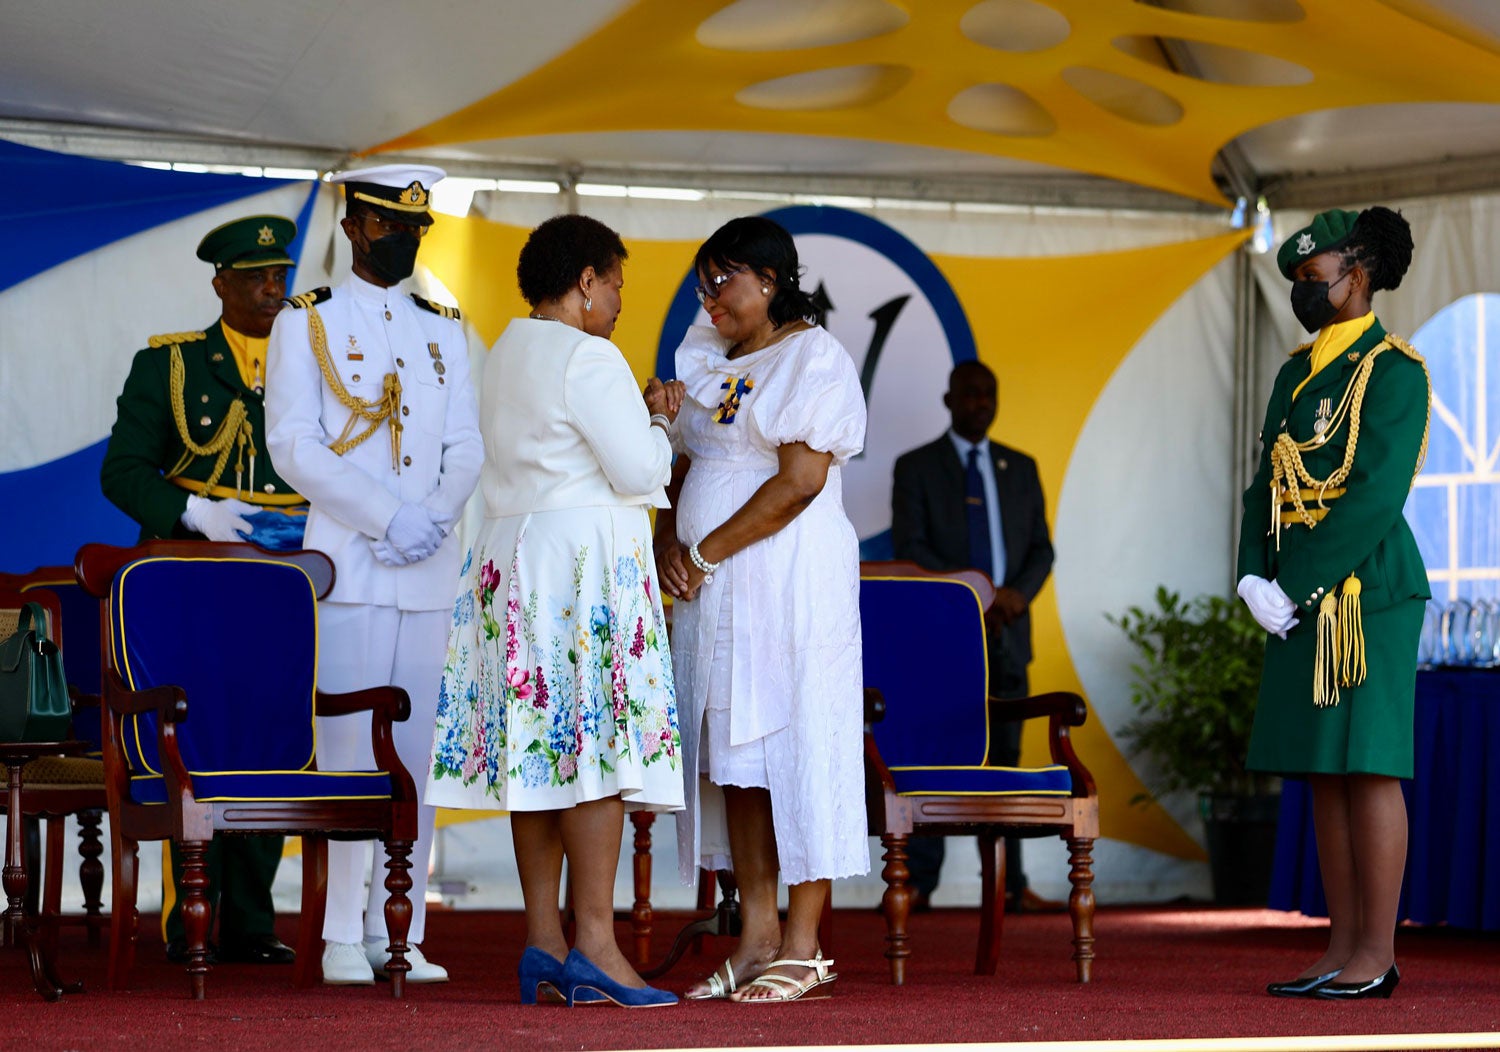 The Award was presented to Dr. Etienne by the President of Barbados, Her Excellency the Most Honourable Dame Sandra Mason.